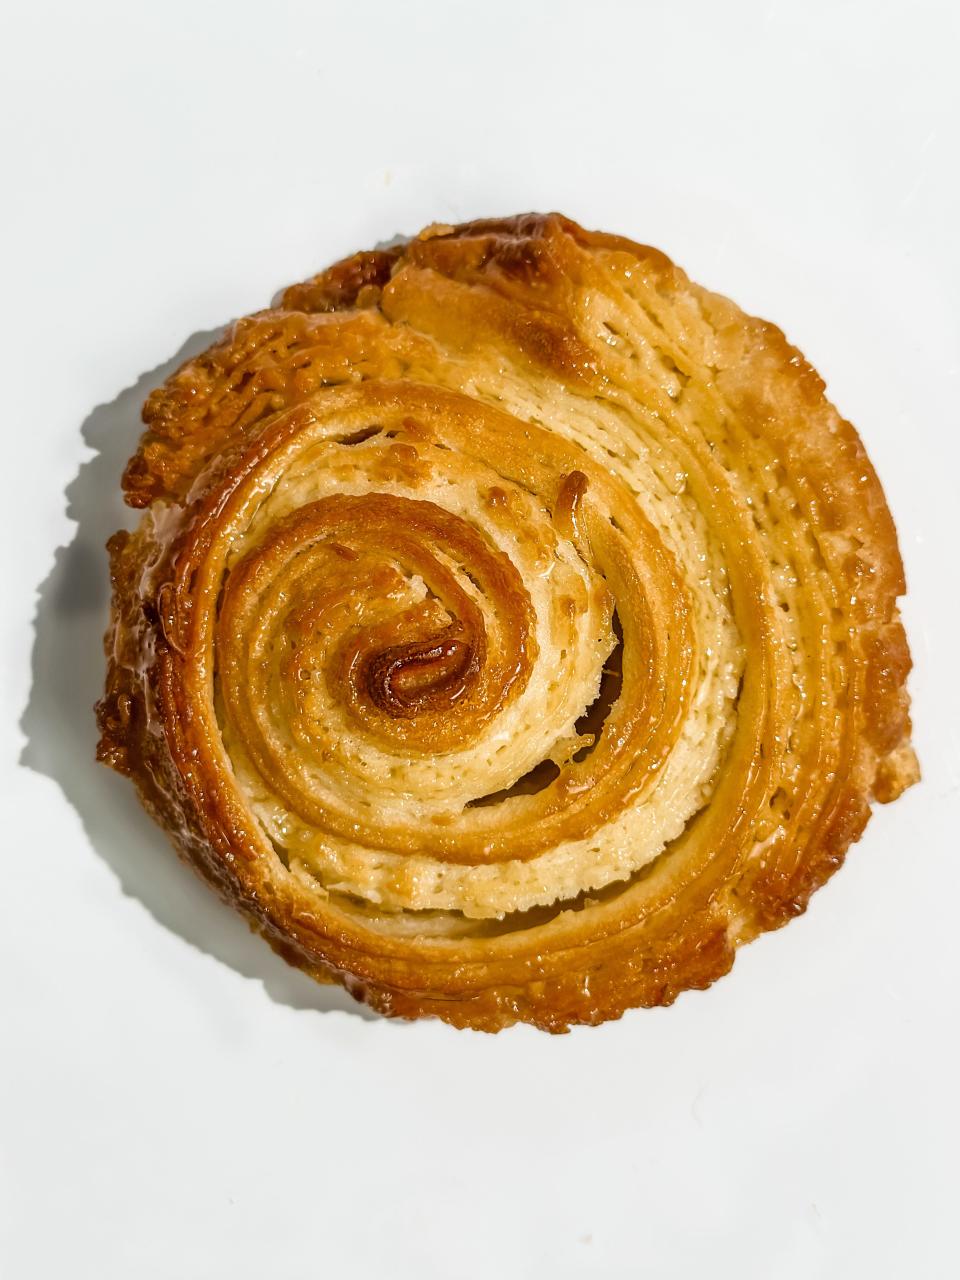 French Broad Pantry is offering the traditional French dessert, Kouign Amann, this holiday season.